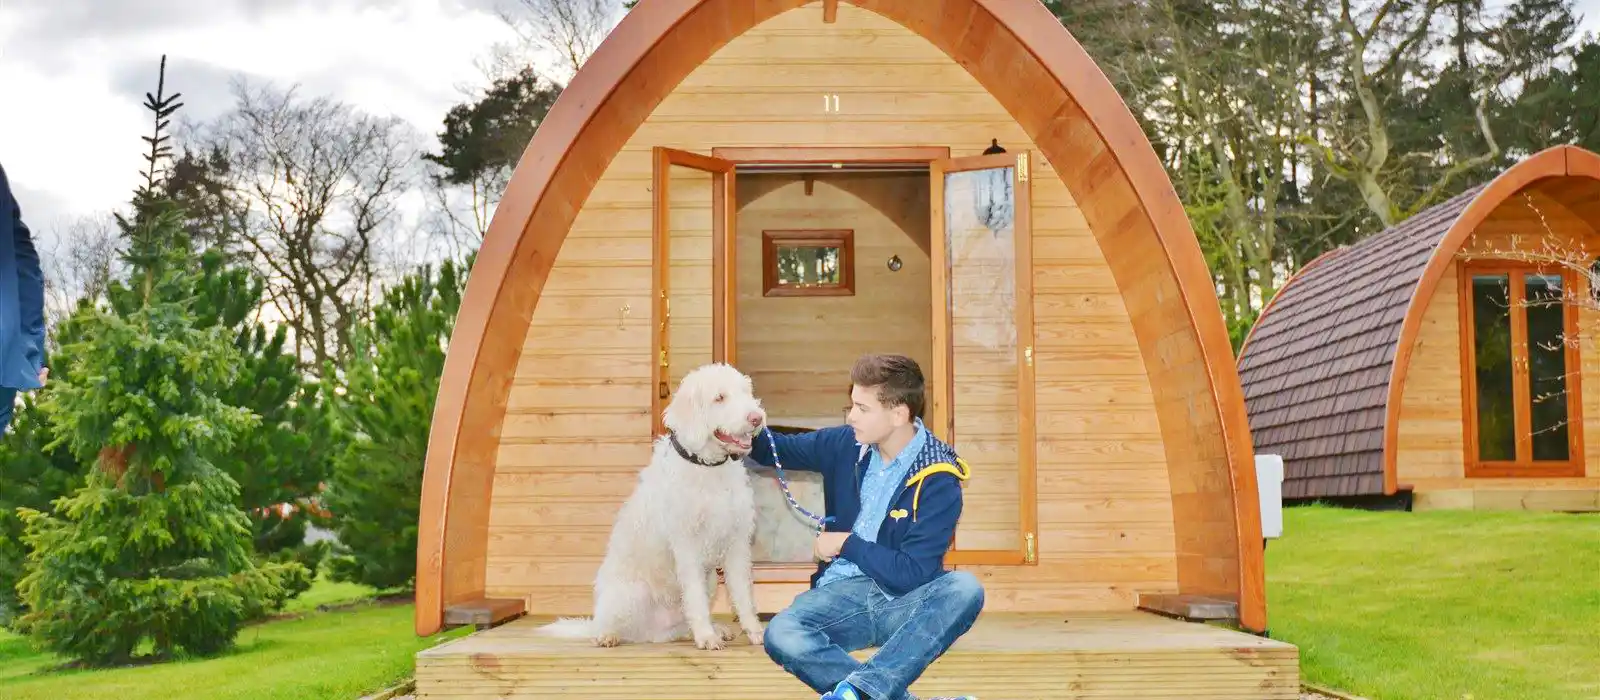 Dog friendly glamping in Yorkshire